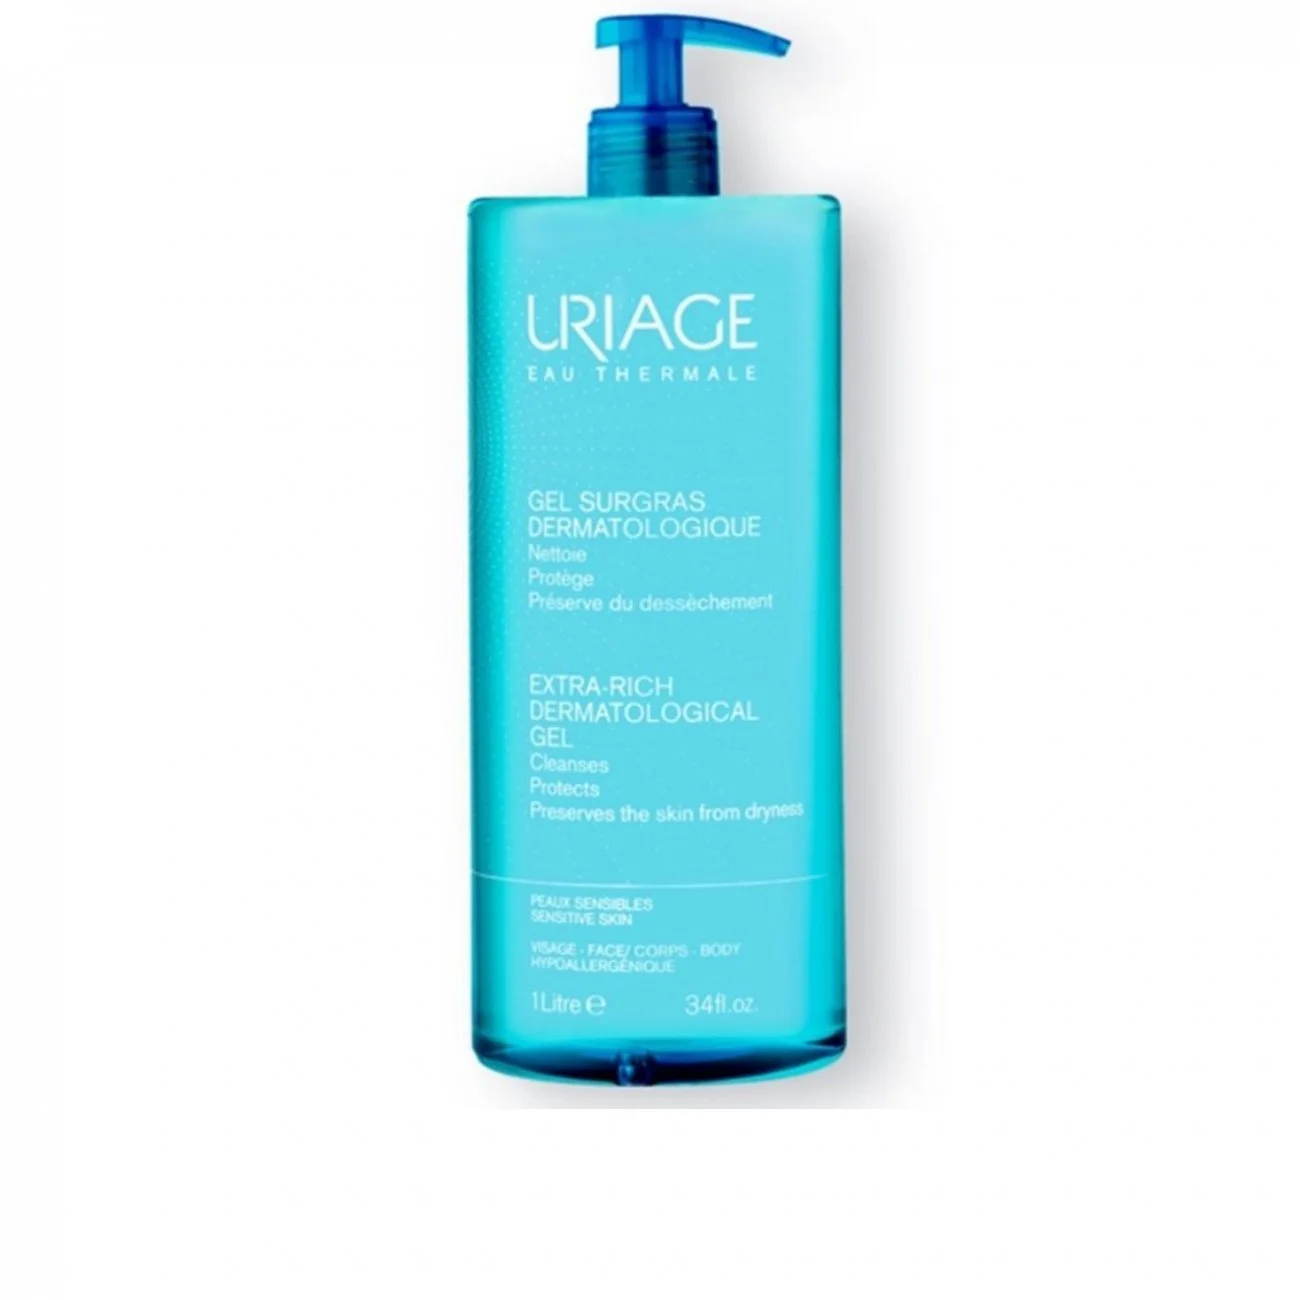 Uriage Eau Thermale Extra Rich Dermatological Gel